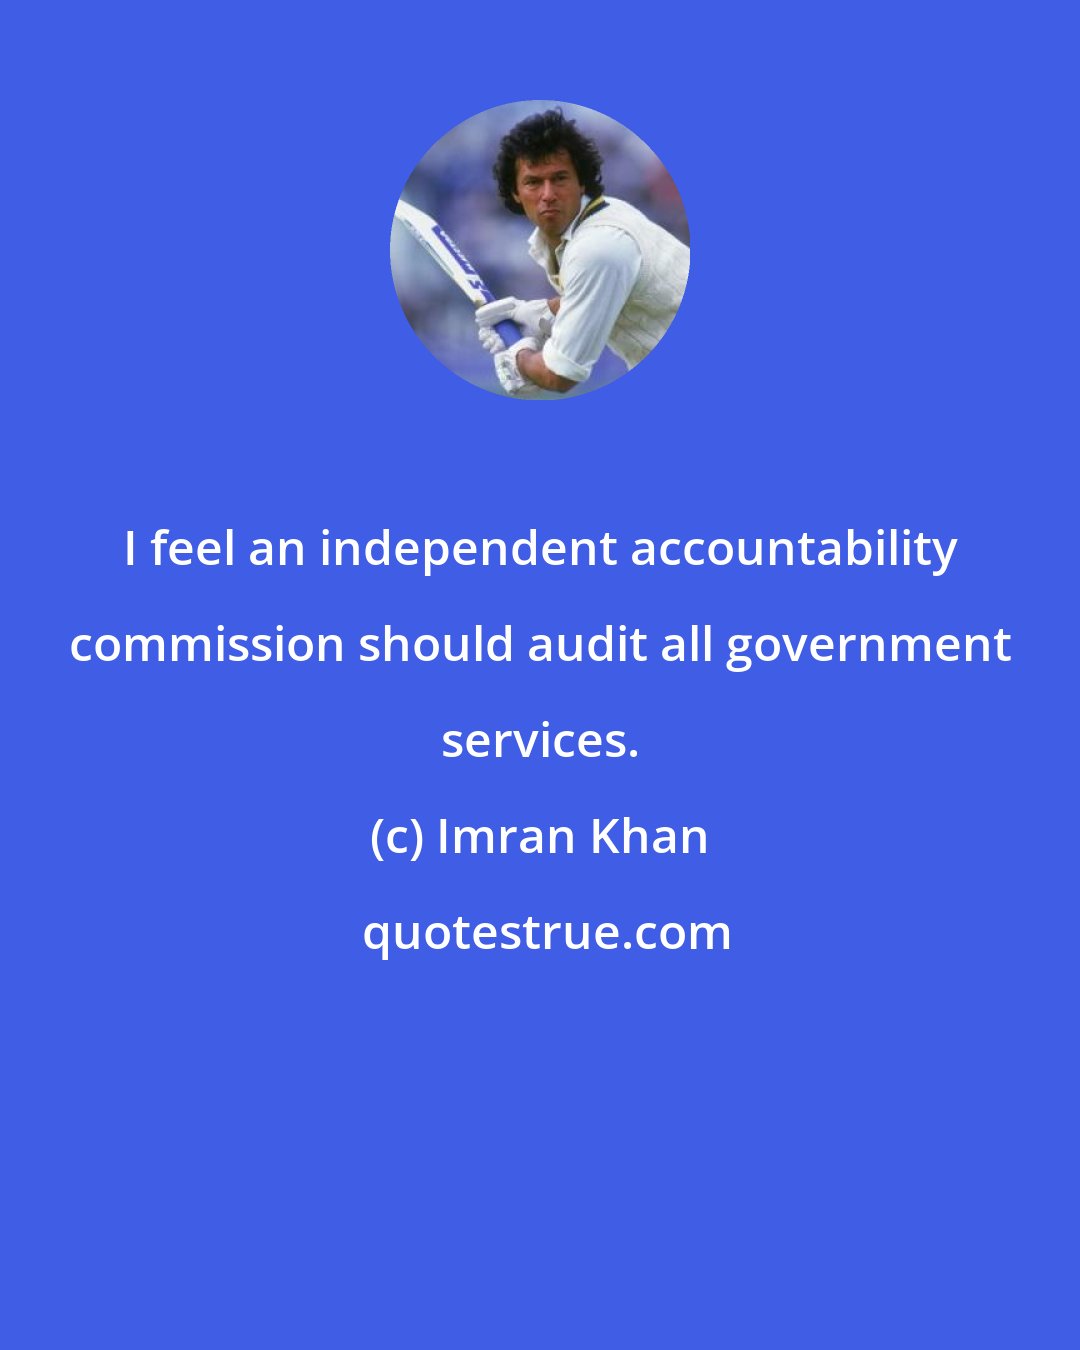 Imran Khan: I feel an independent accountability commission should audit all government services.